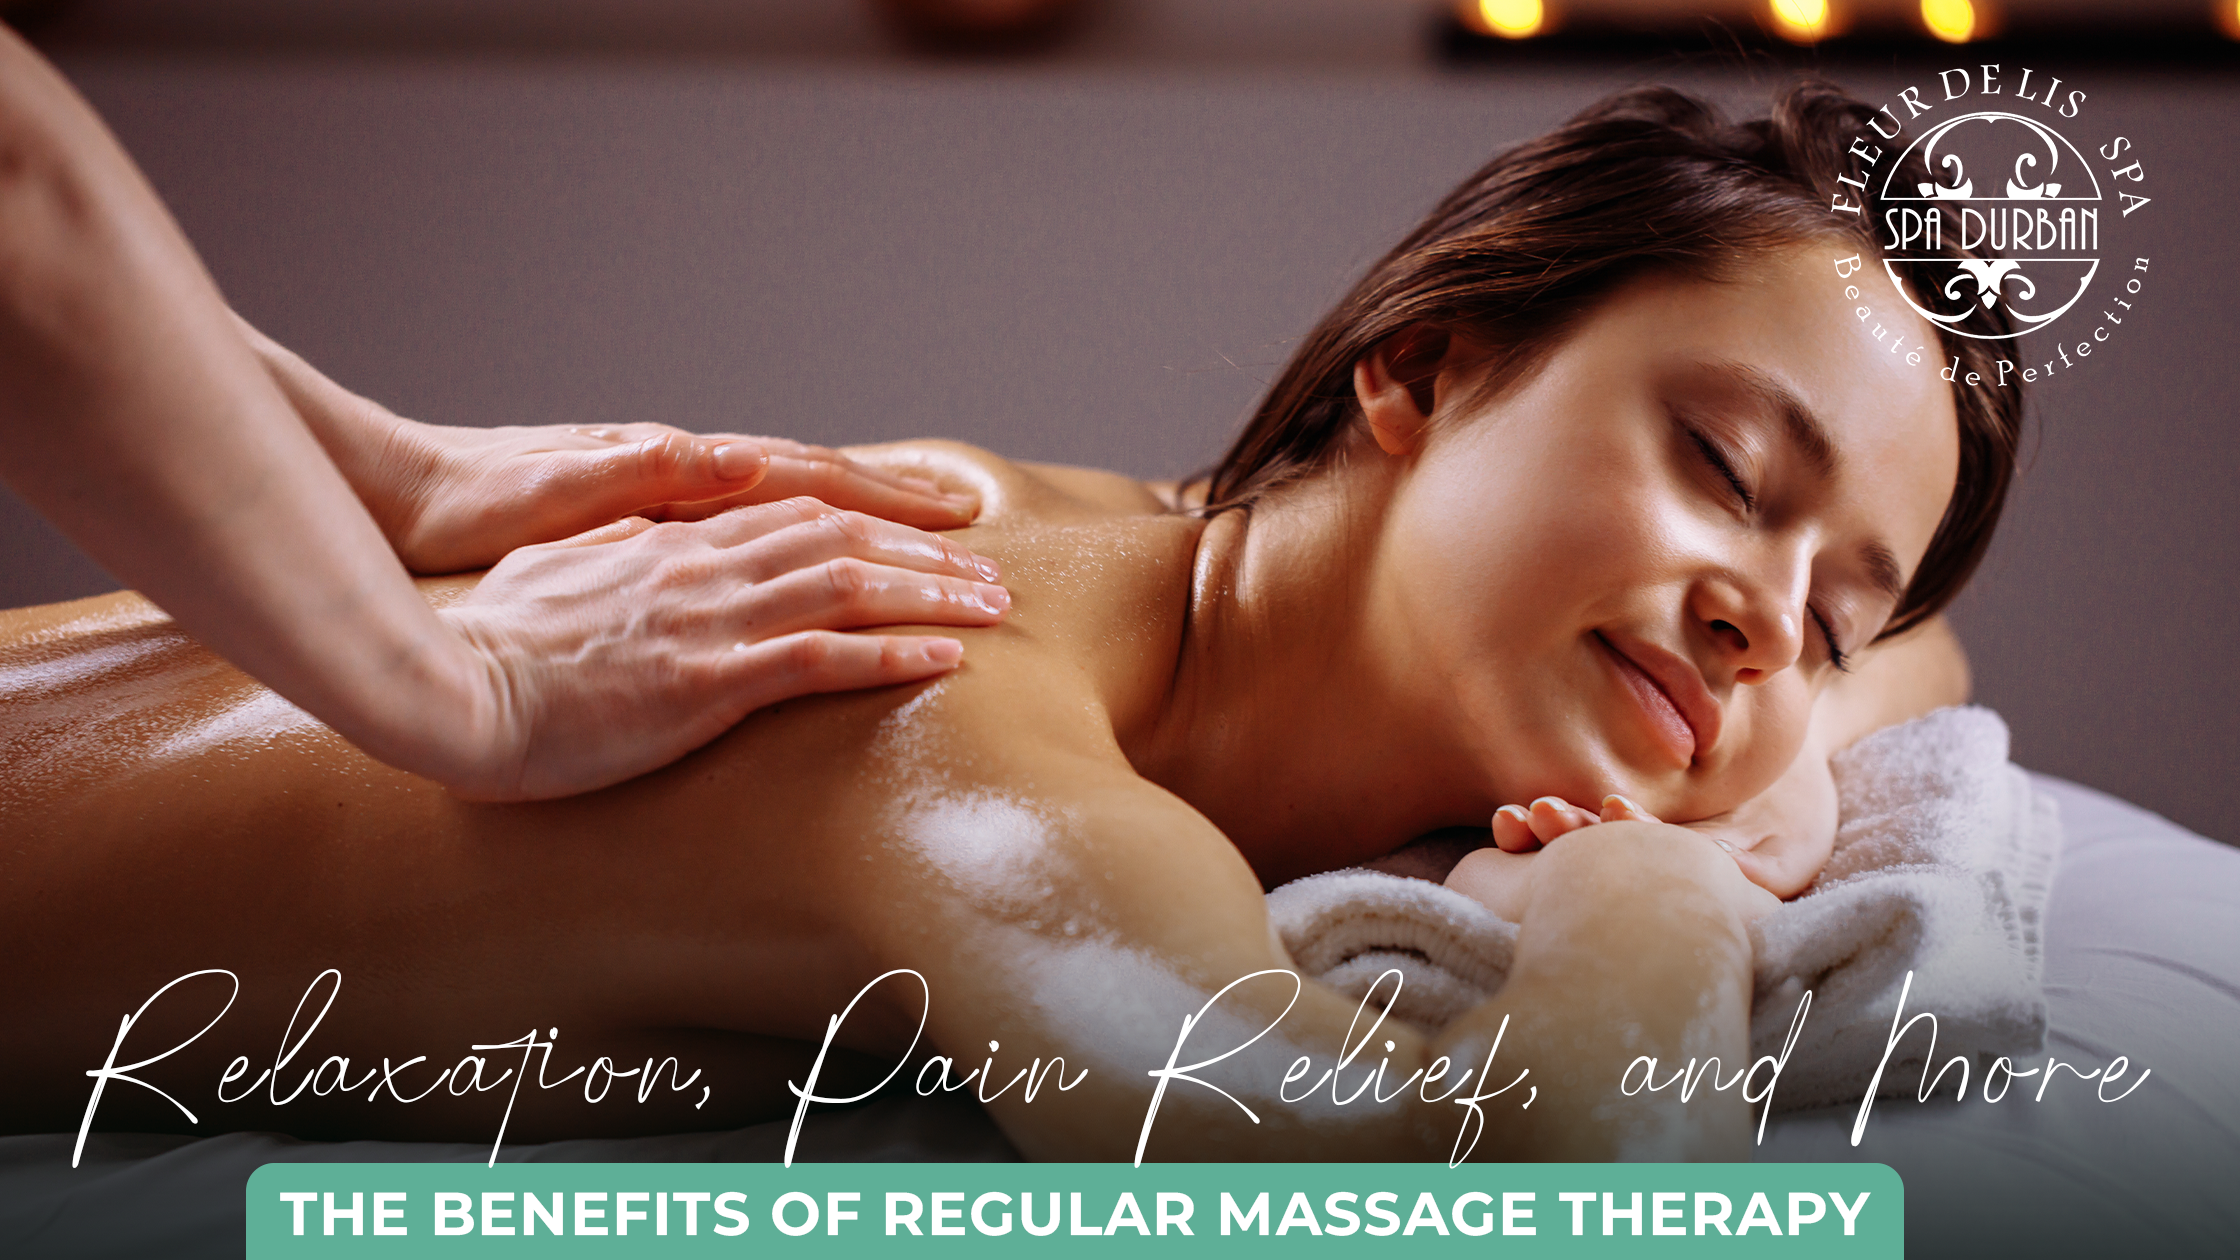 The Benefits of Regular Massage Therapy: Relaxation, Pain Relief, and More